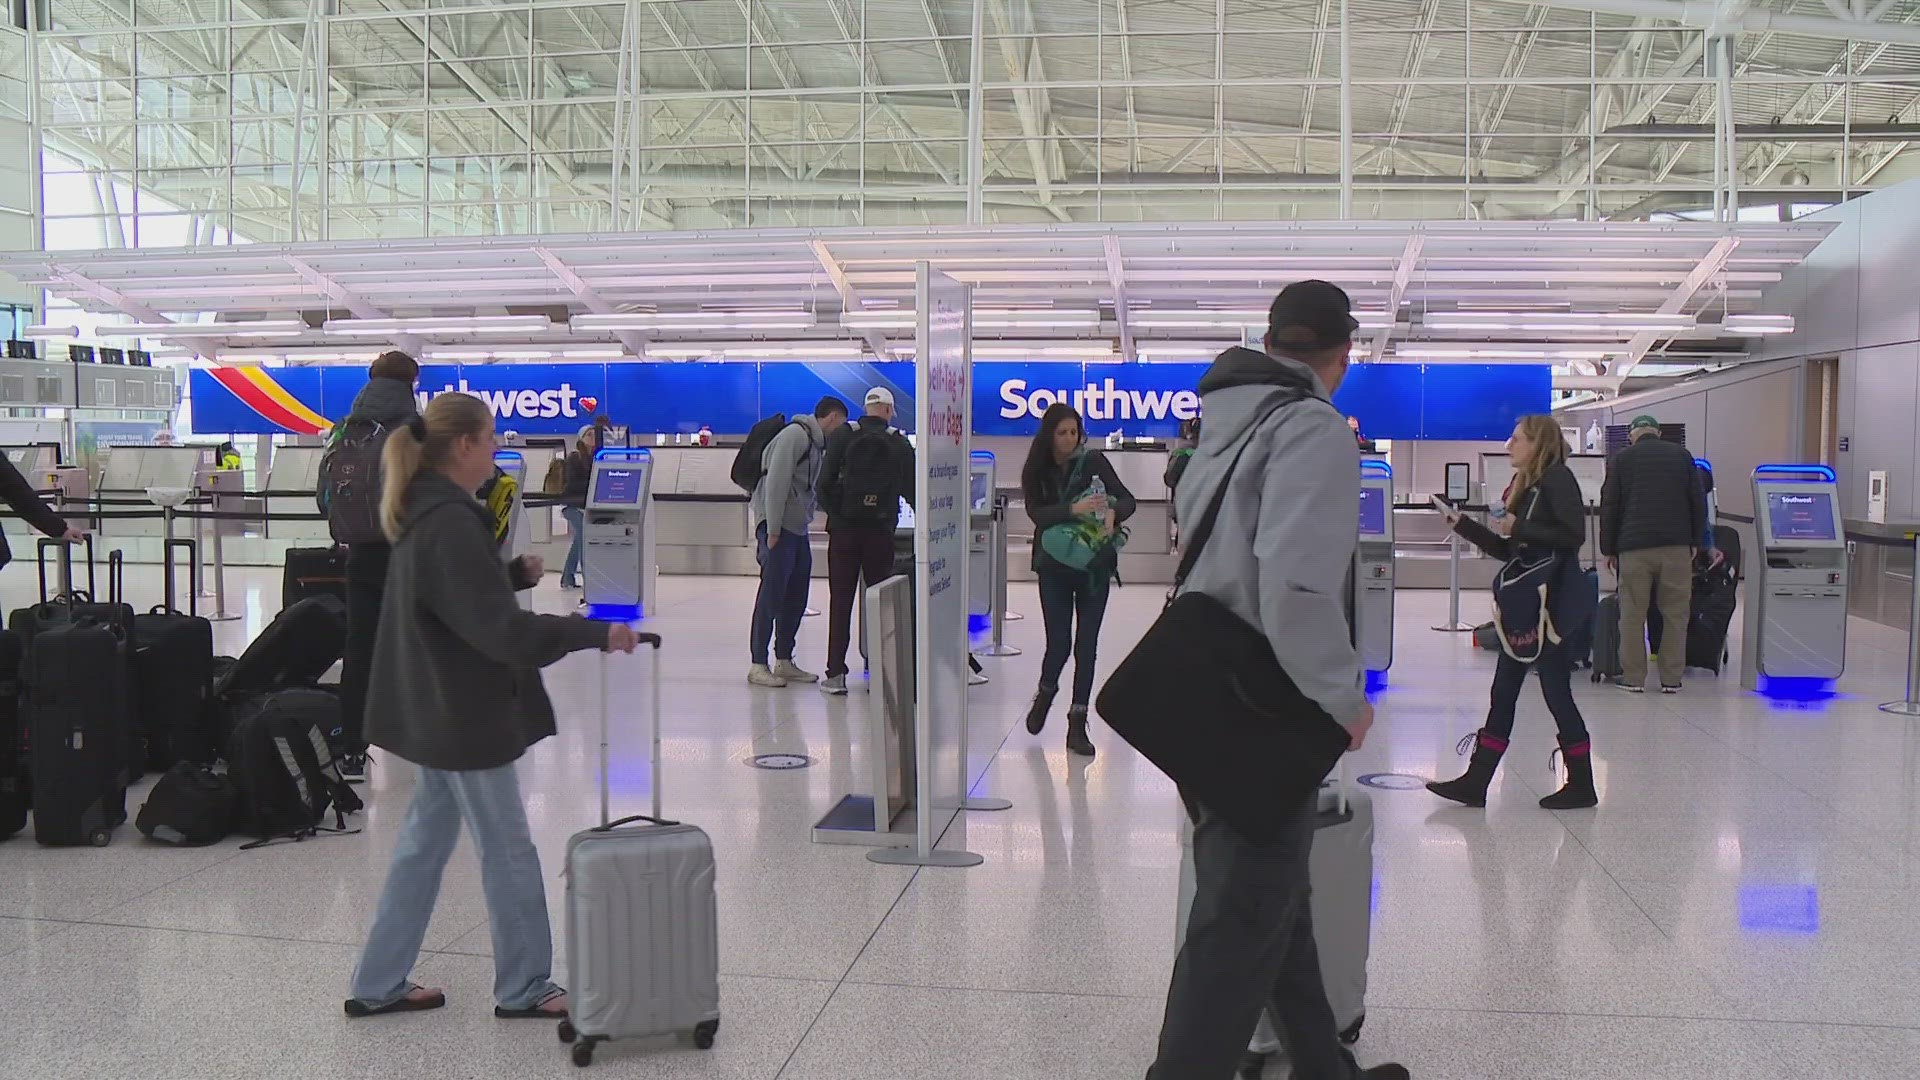 Officials say they expect nearly 70,000 travelers through the weekend at the Indianapolis International Airport